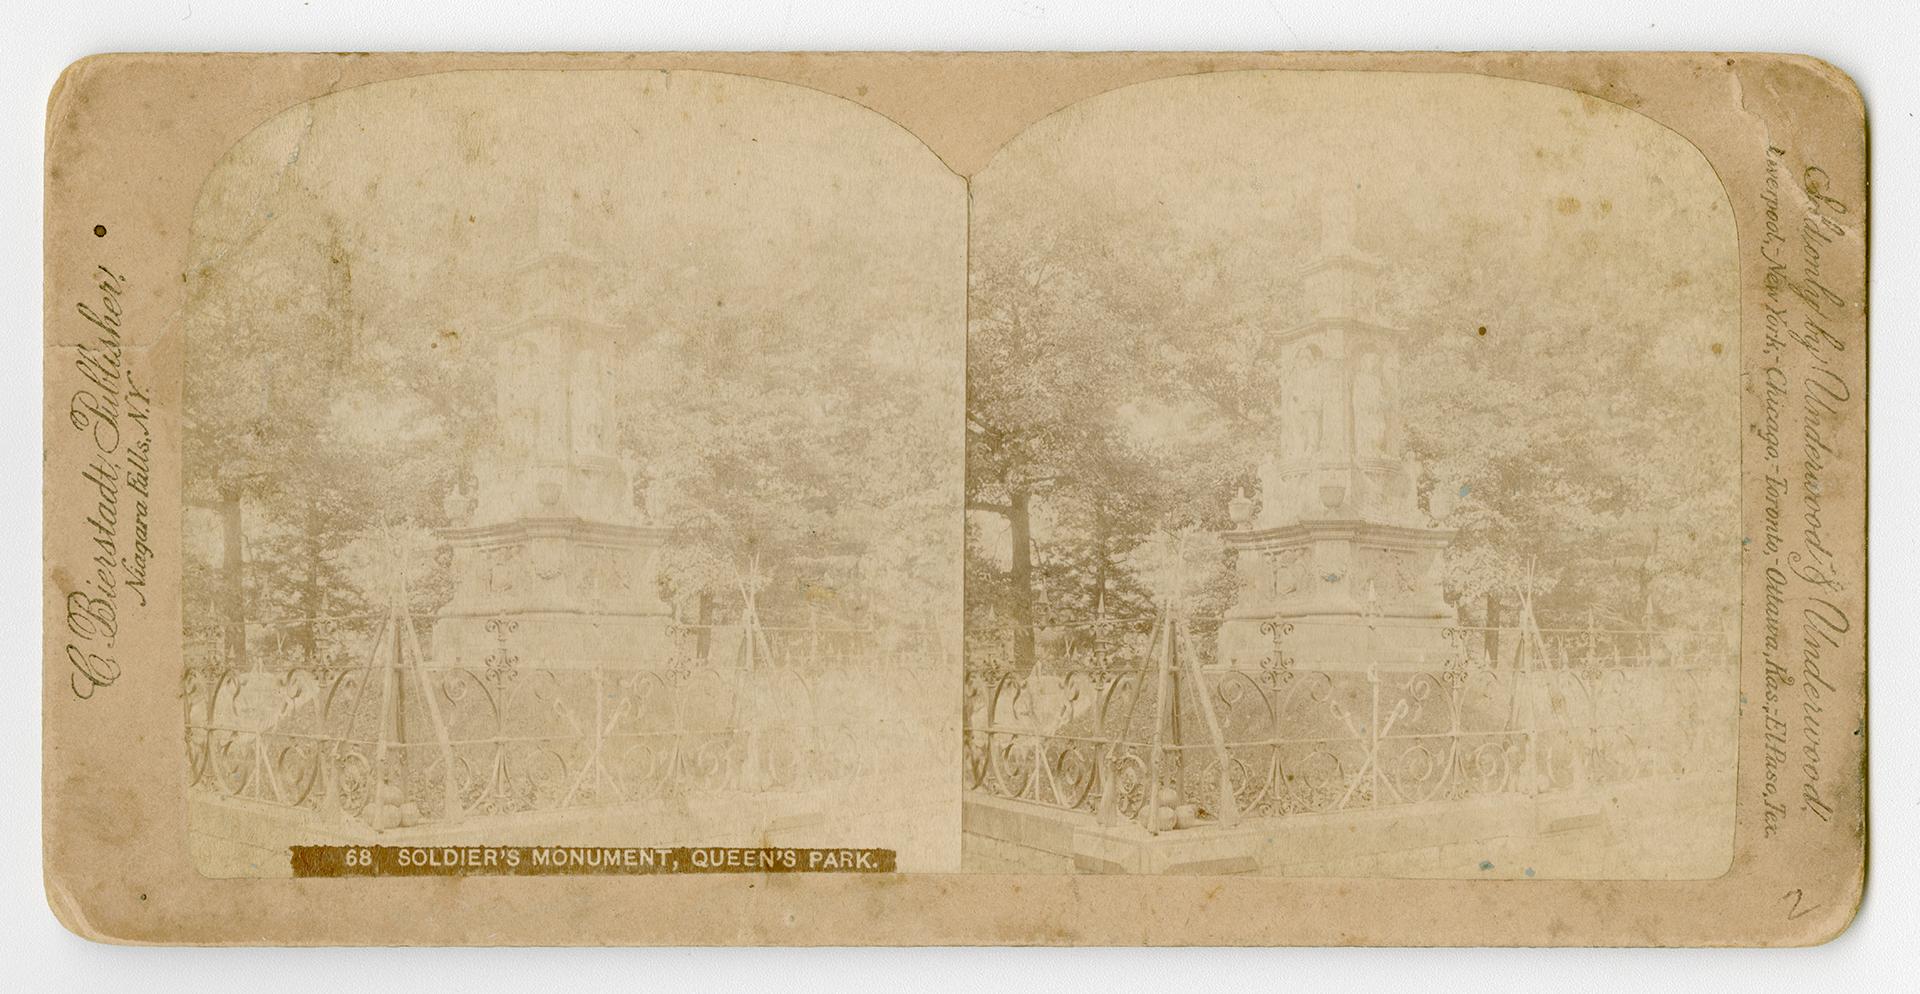 Pictures show a large stone monument in a park.